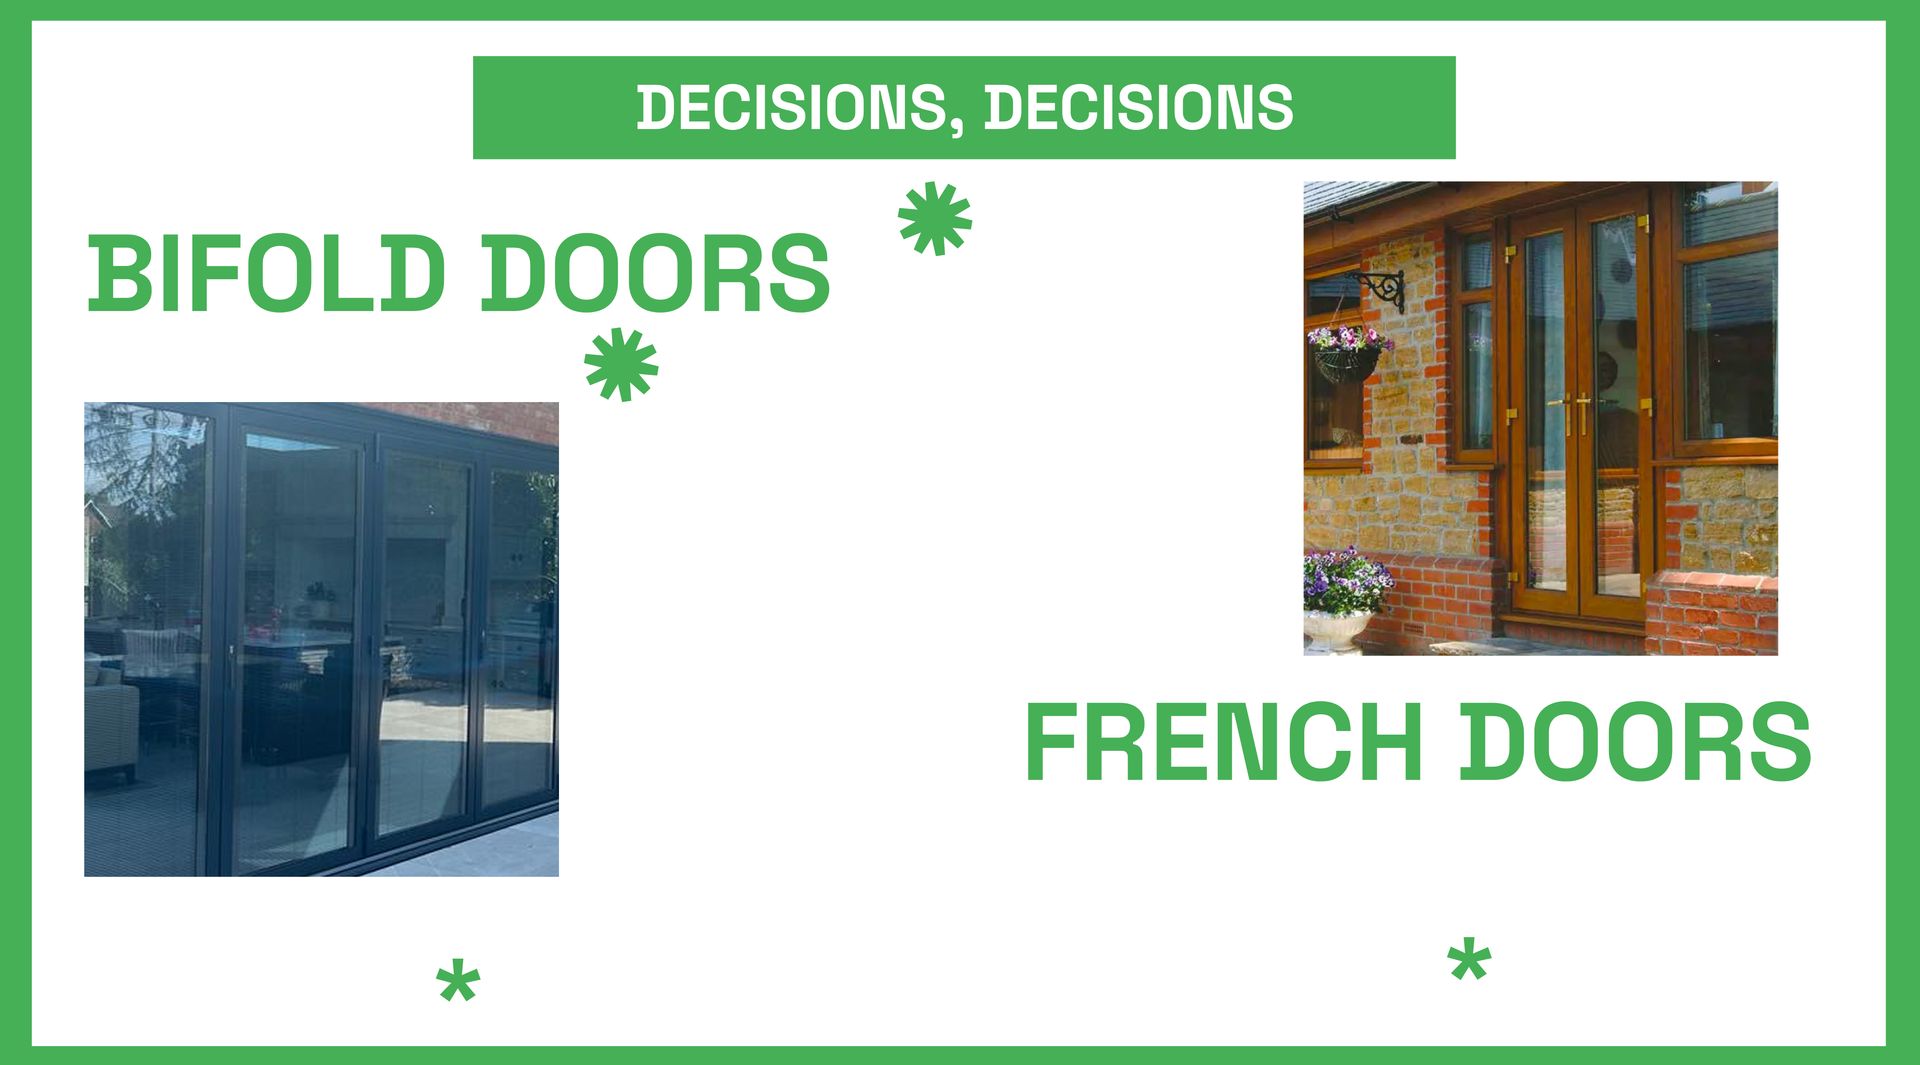 Should I Invest in Bifold Doors or French Doors